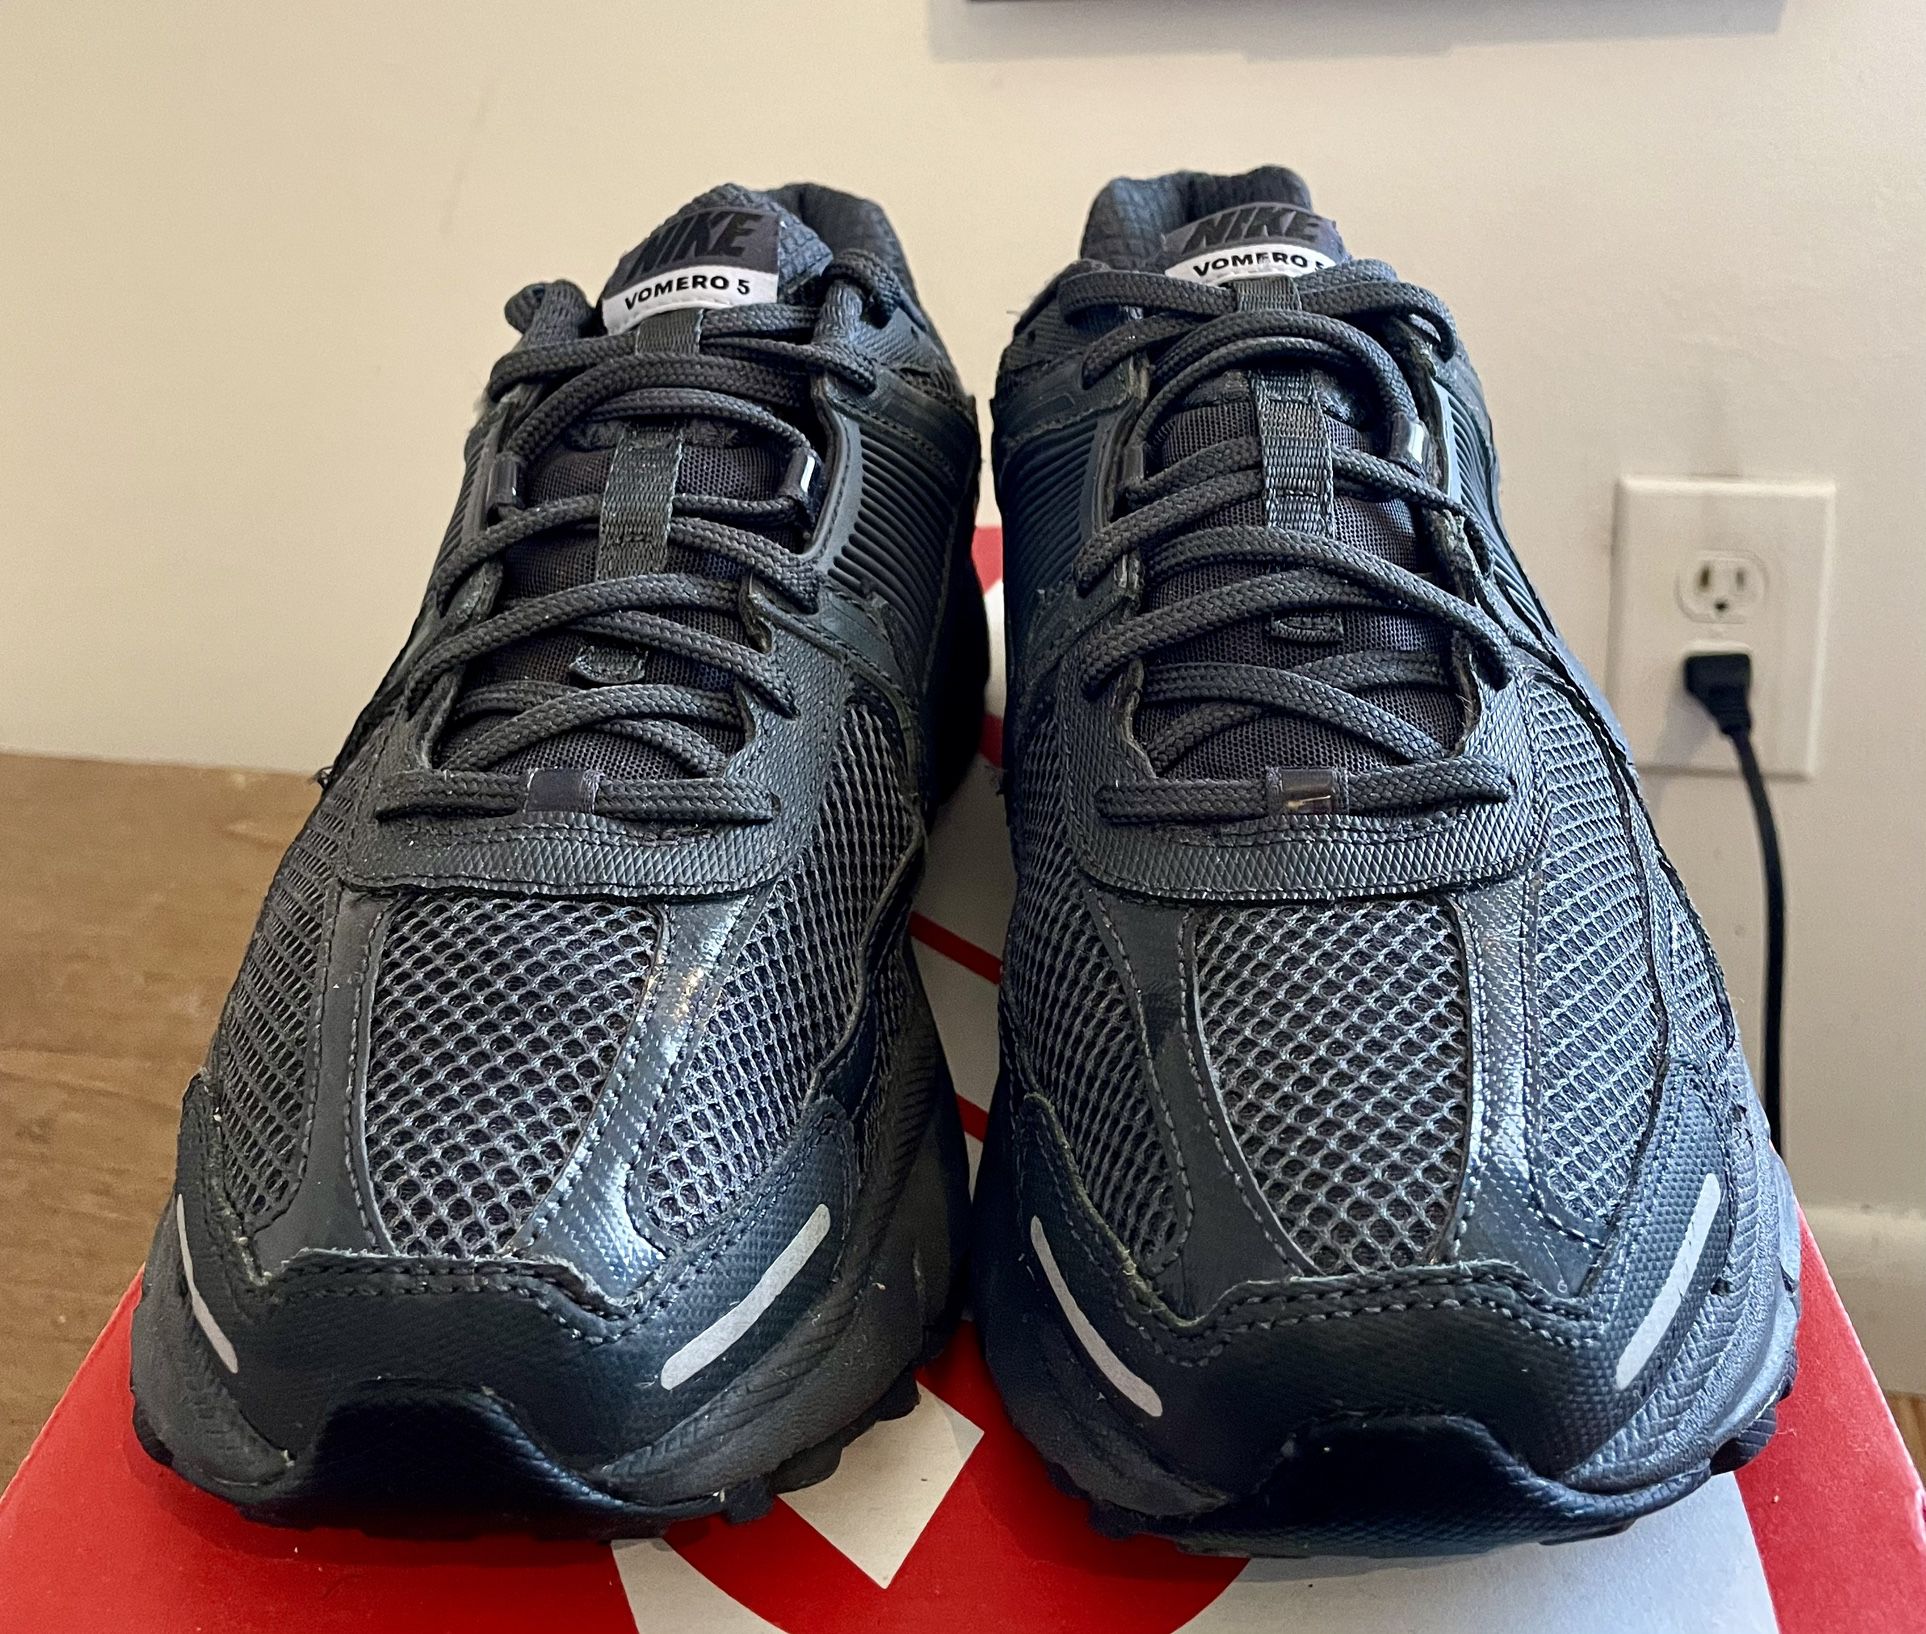 Nike Vomero 5 Anthracite SP Size10 for Sale in Clifton, NJ OfferUp